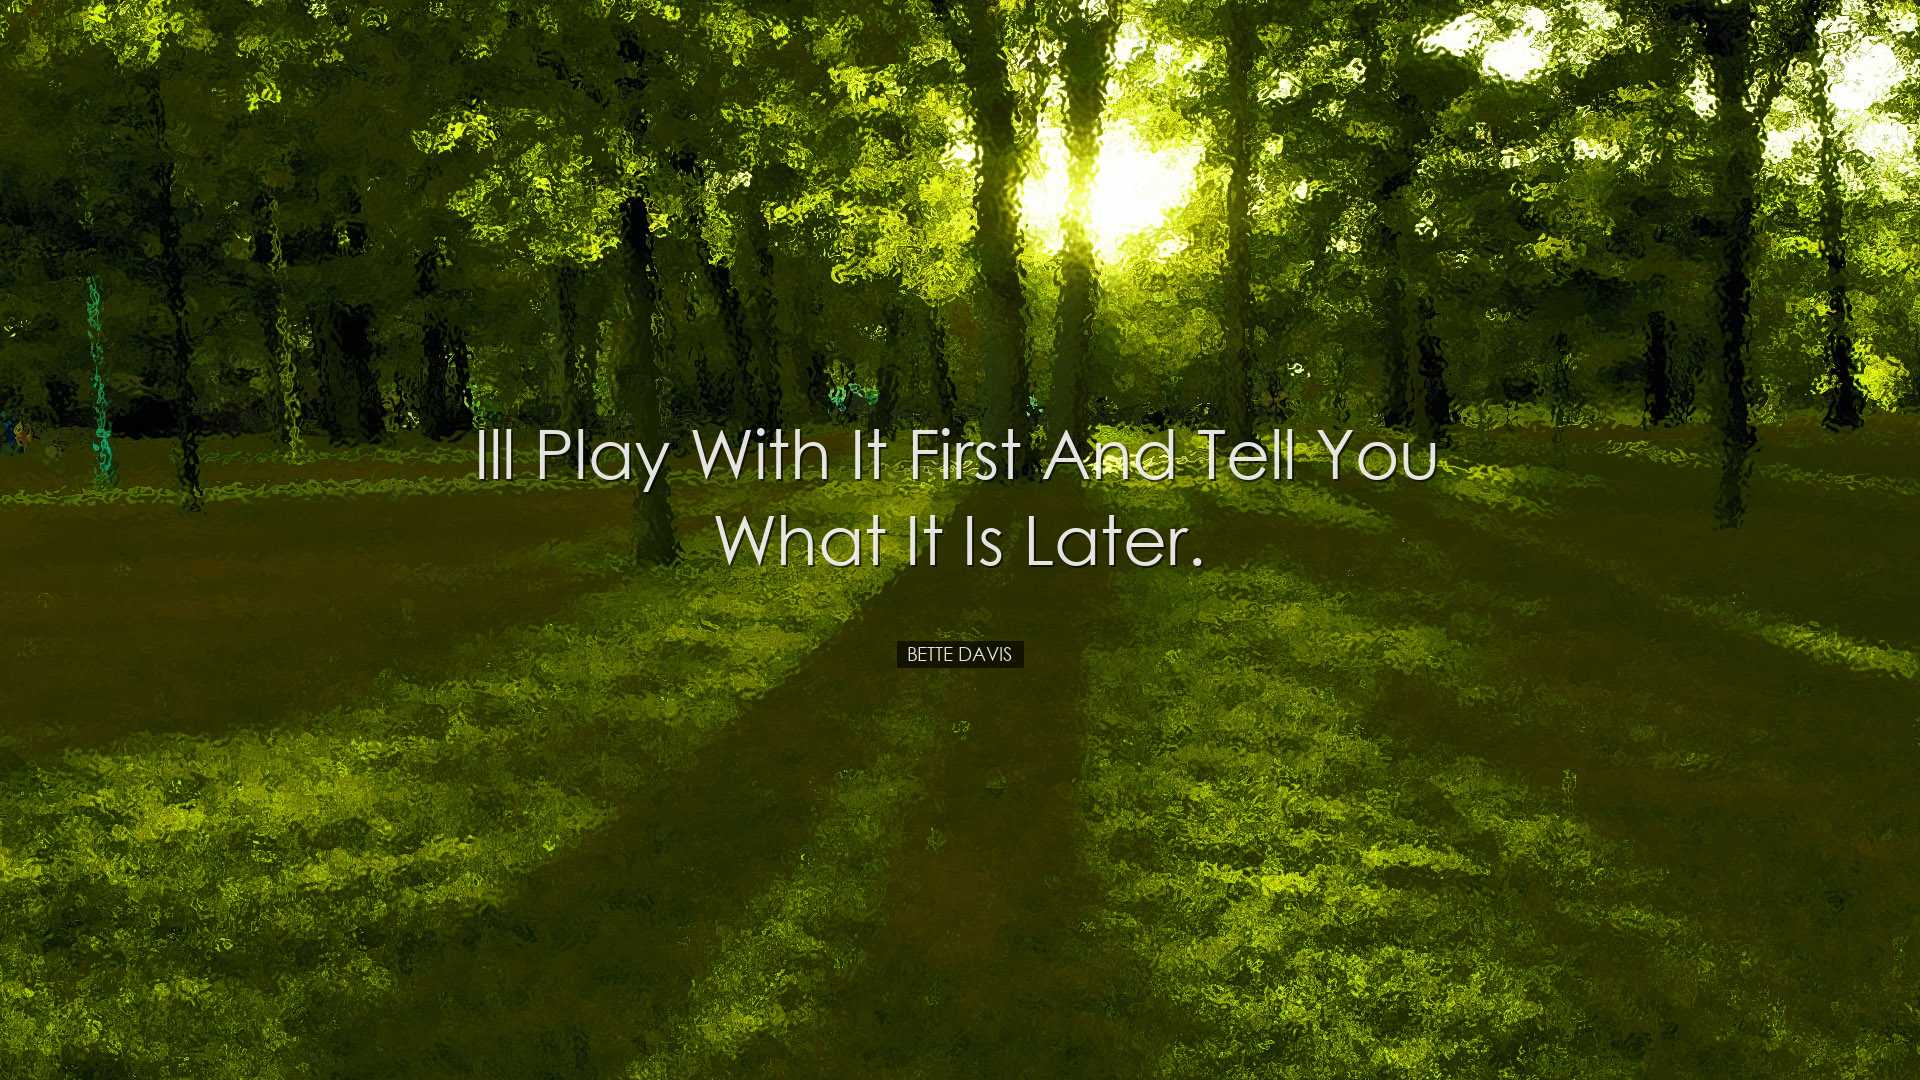 Ill play with it first and tell you what it is later. - Bette Davi